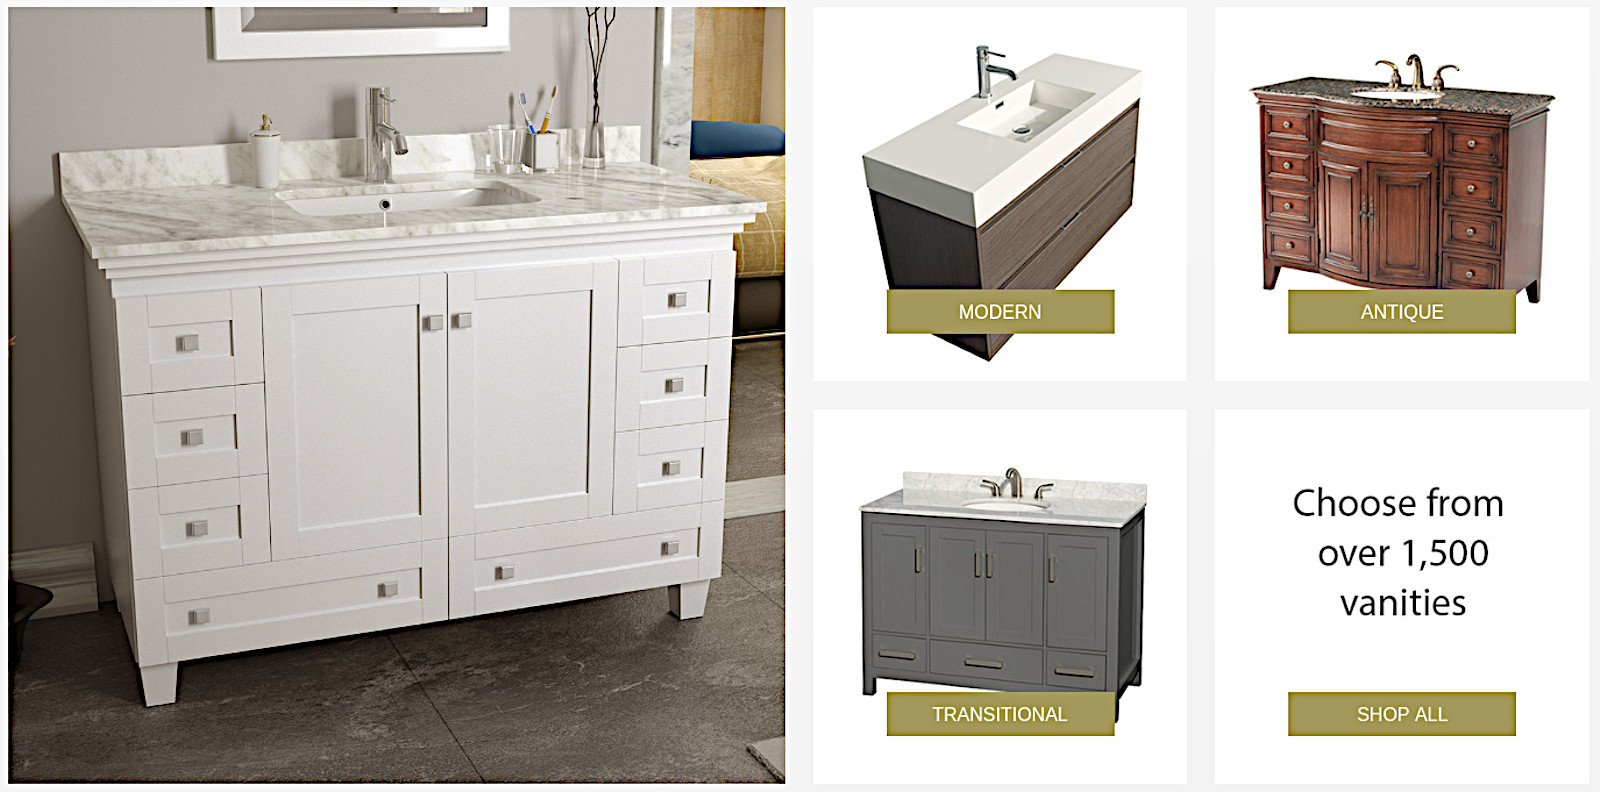 Special Price modern antique transitional vanities